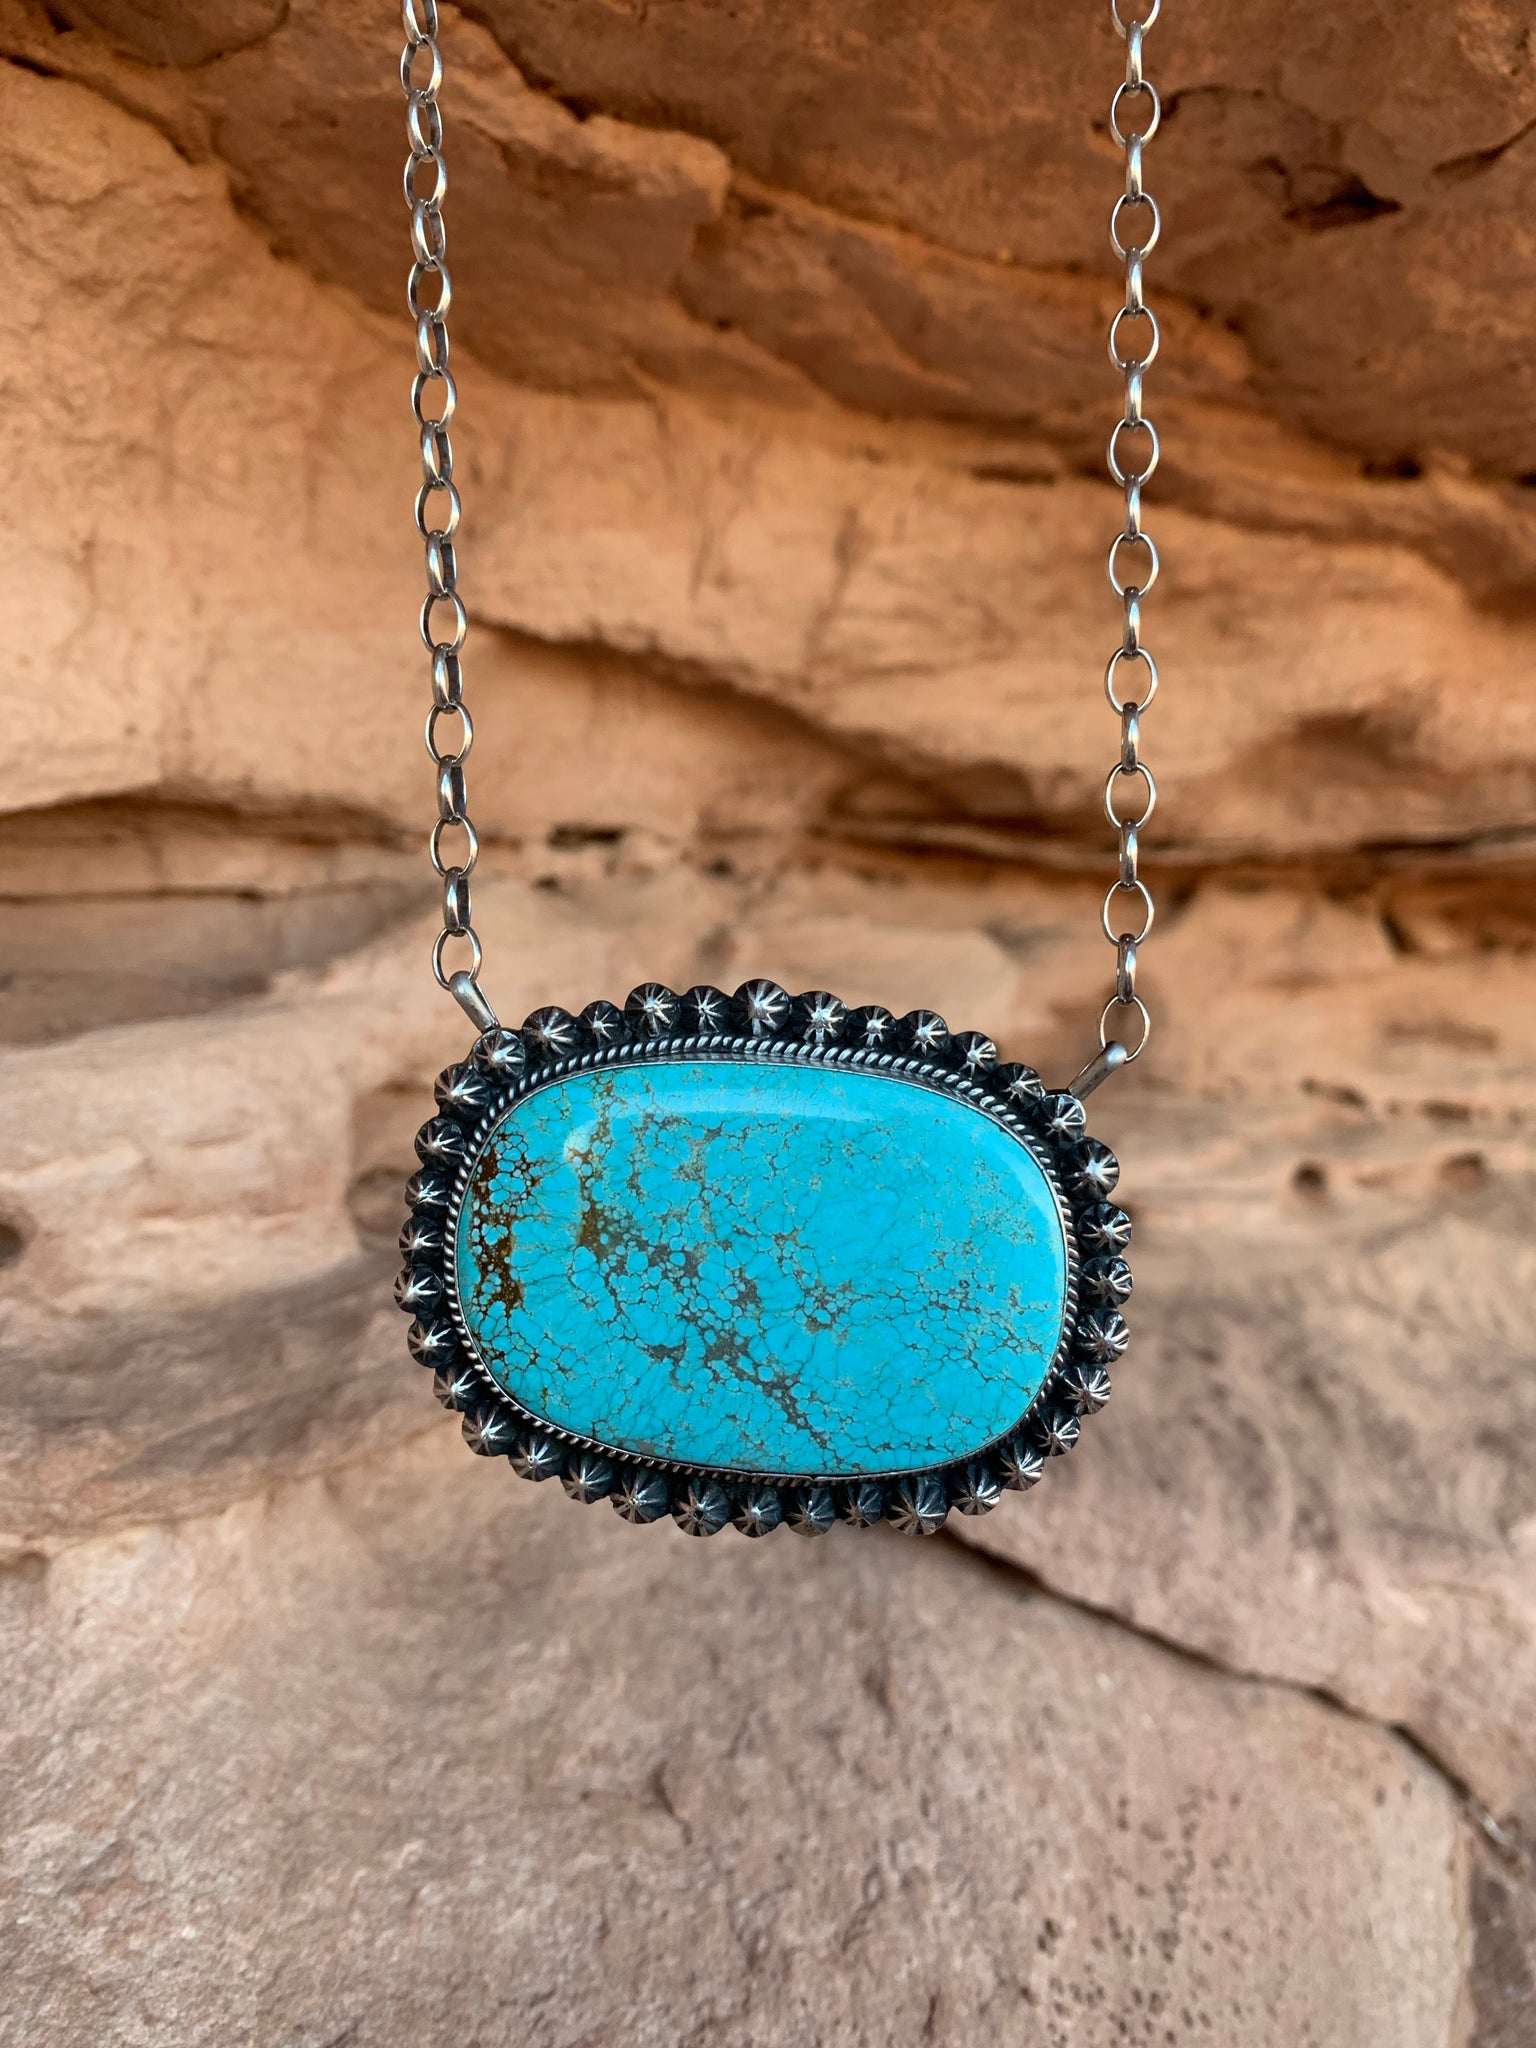 Studded Turquoise necklace